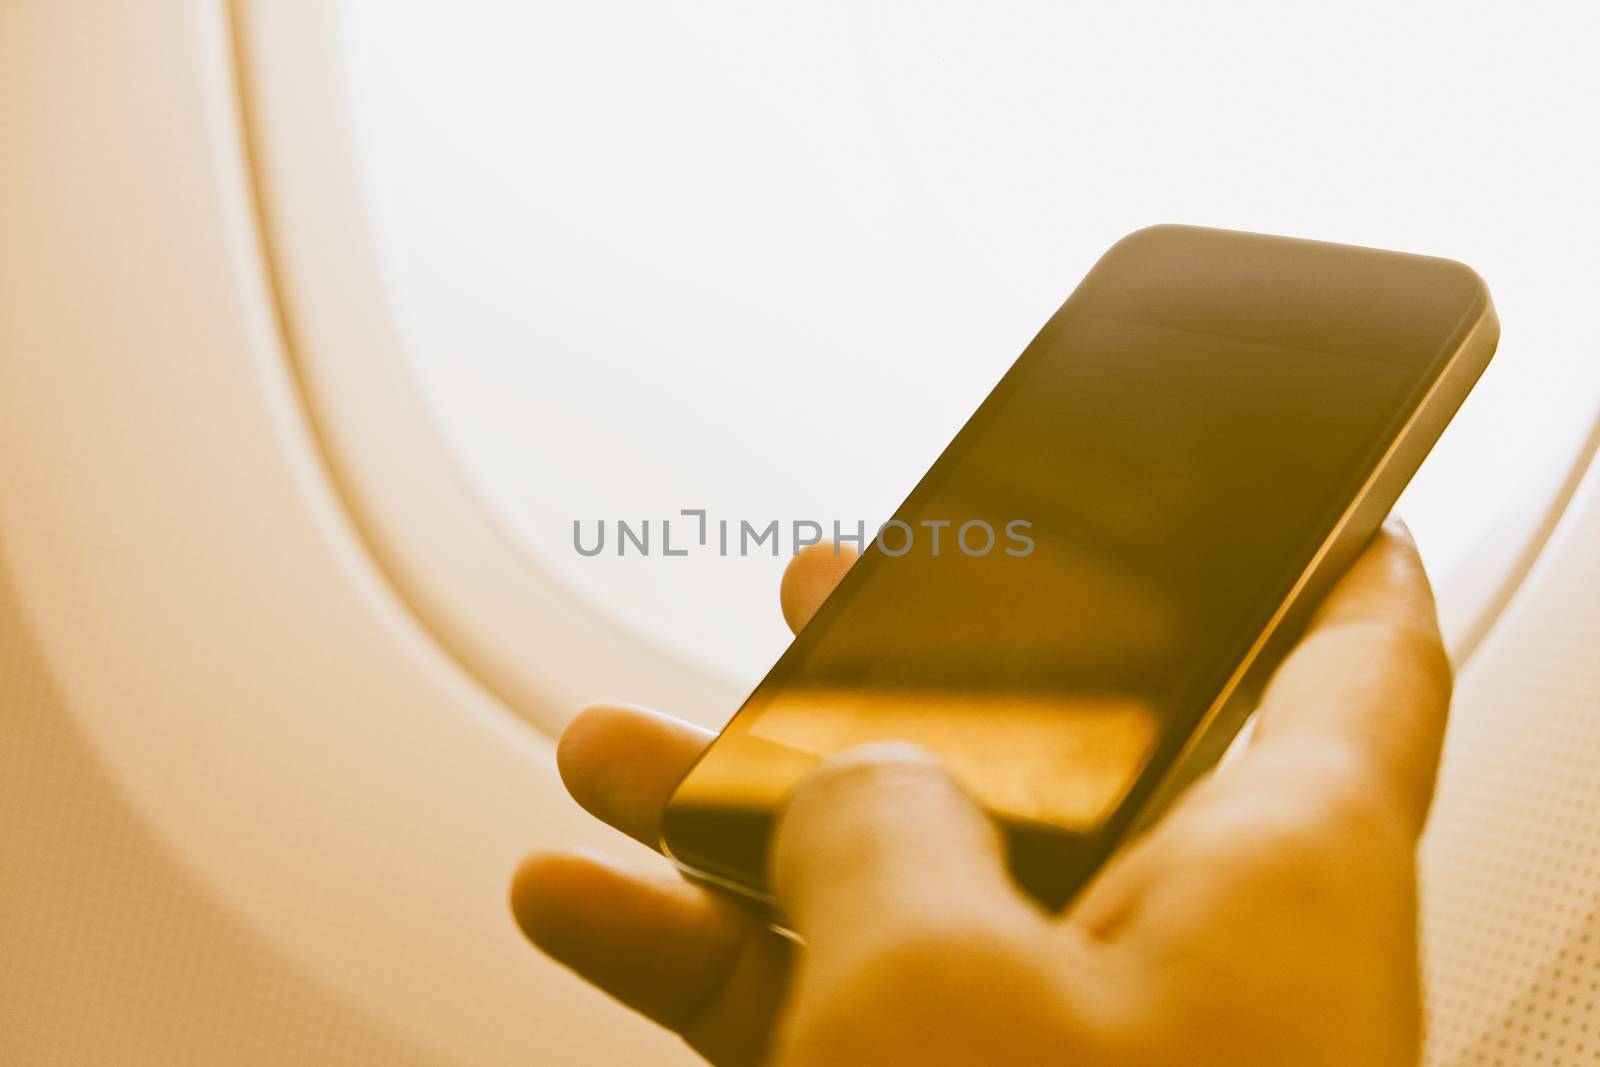 close up of business man siting near airplane window and watching his phone, Business communication